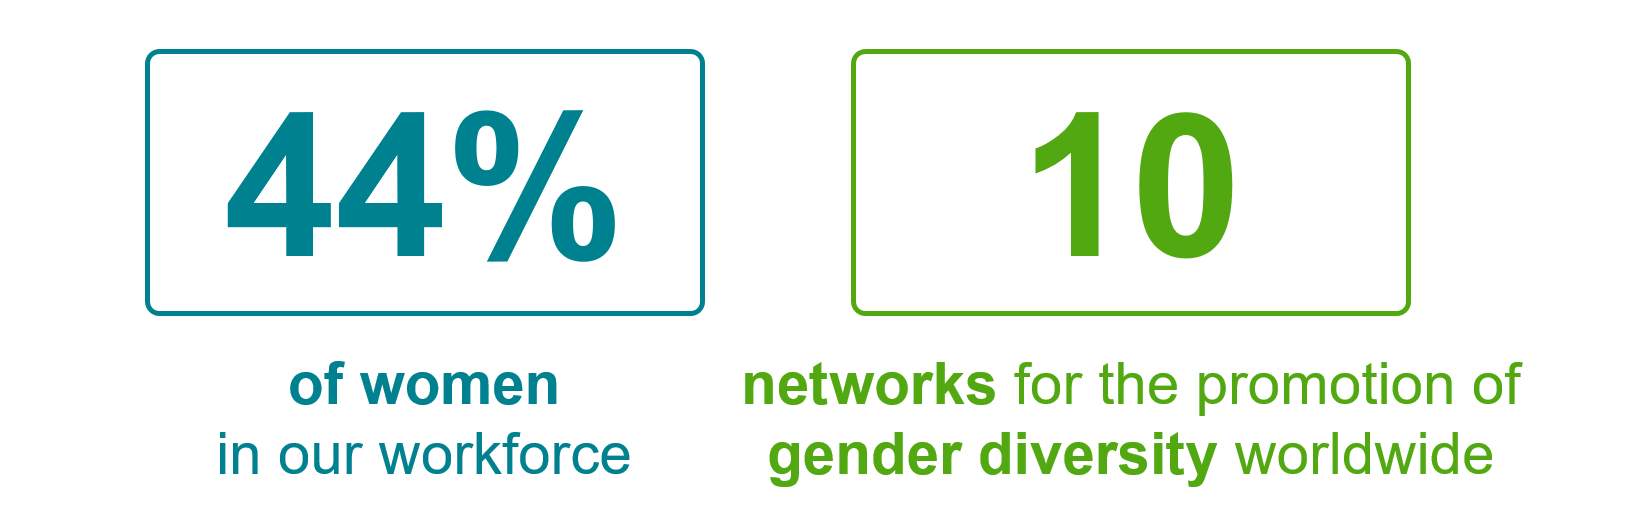 Key figures: 44% of women in the workforce, 10 networks promoting gender diversity throughout the world